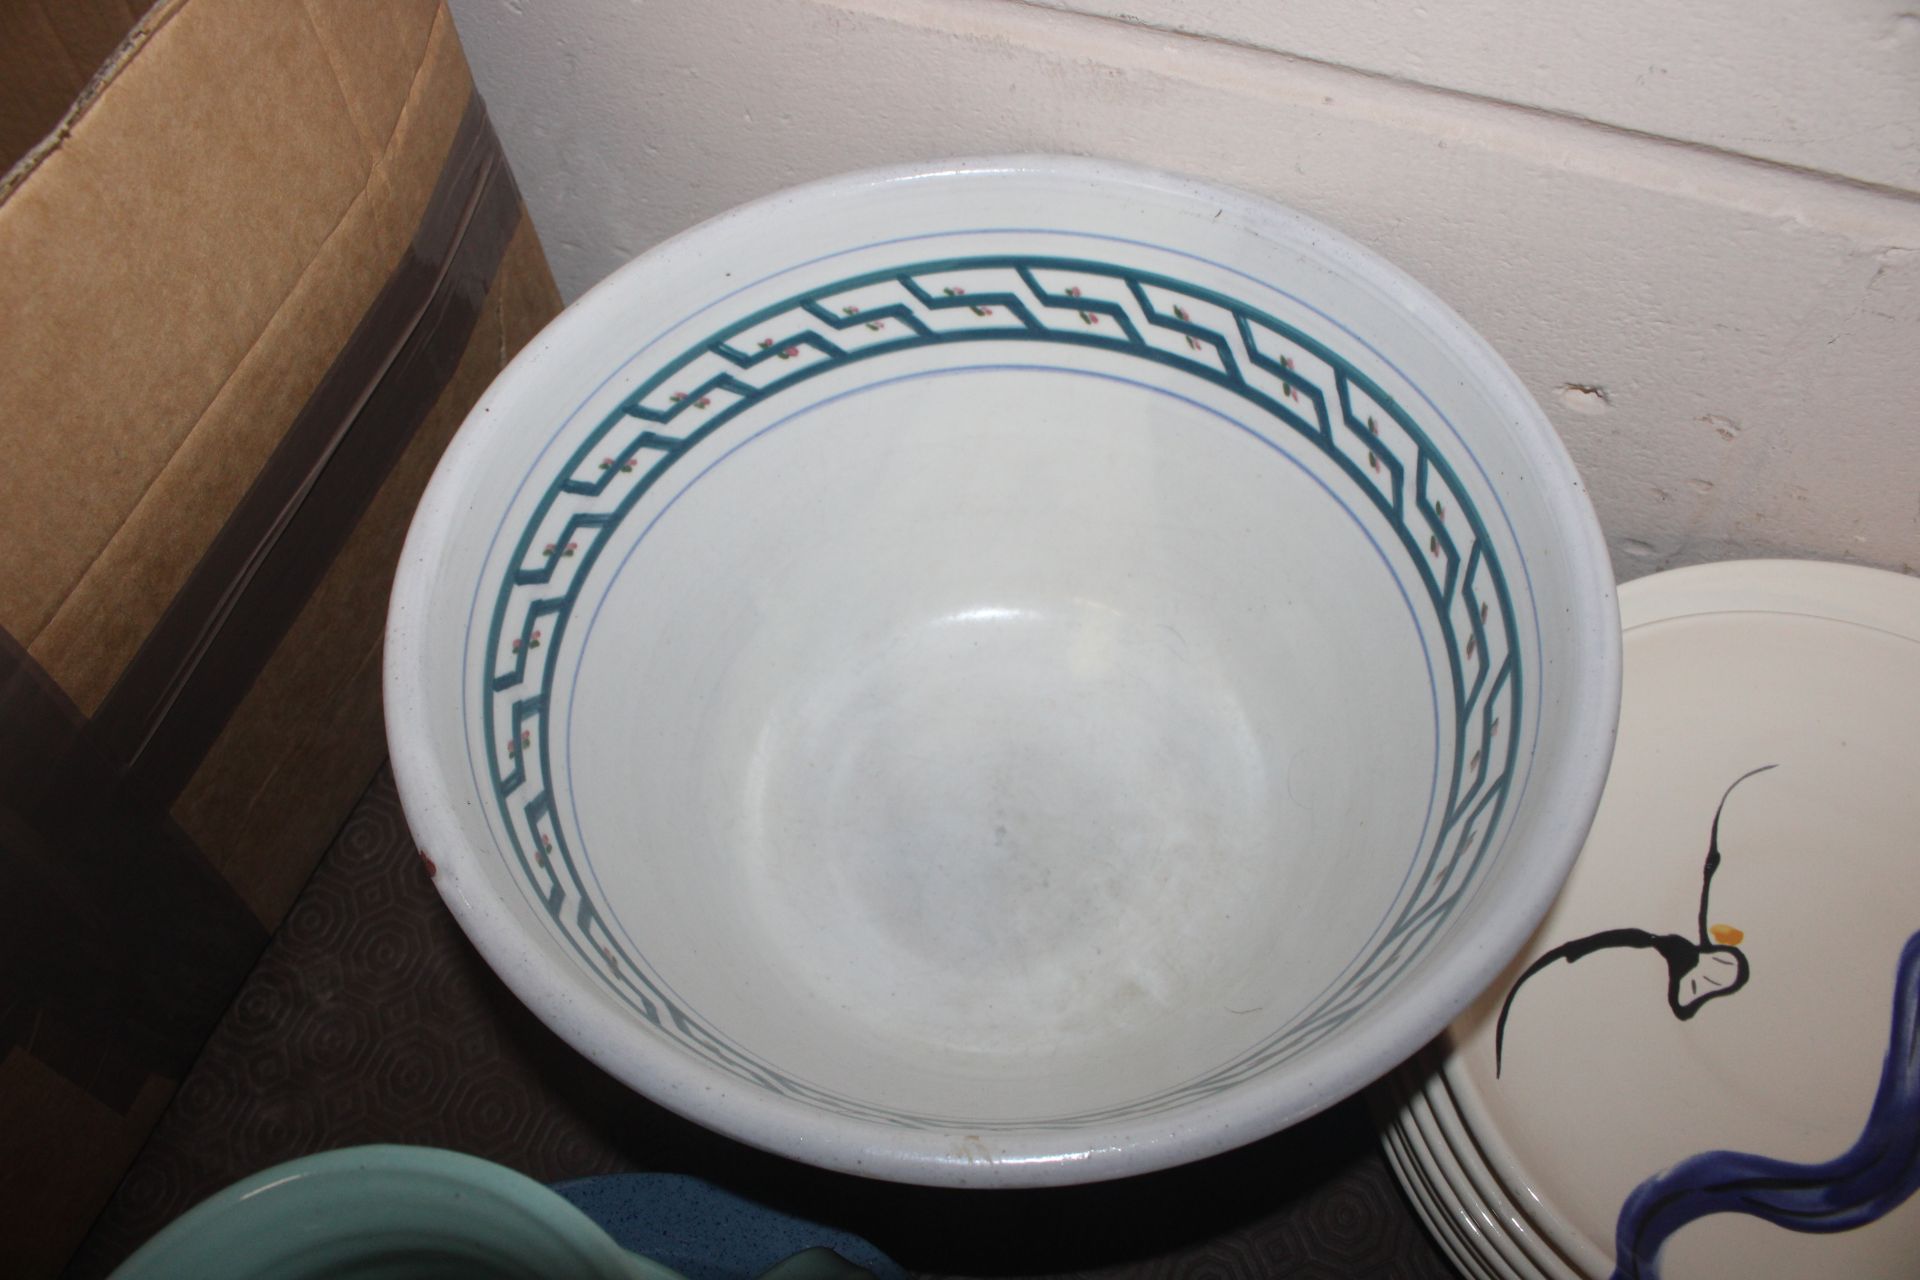 A quantity of decorative bowls and plates - Image 13 of 14